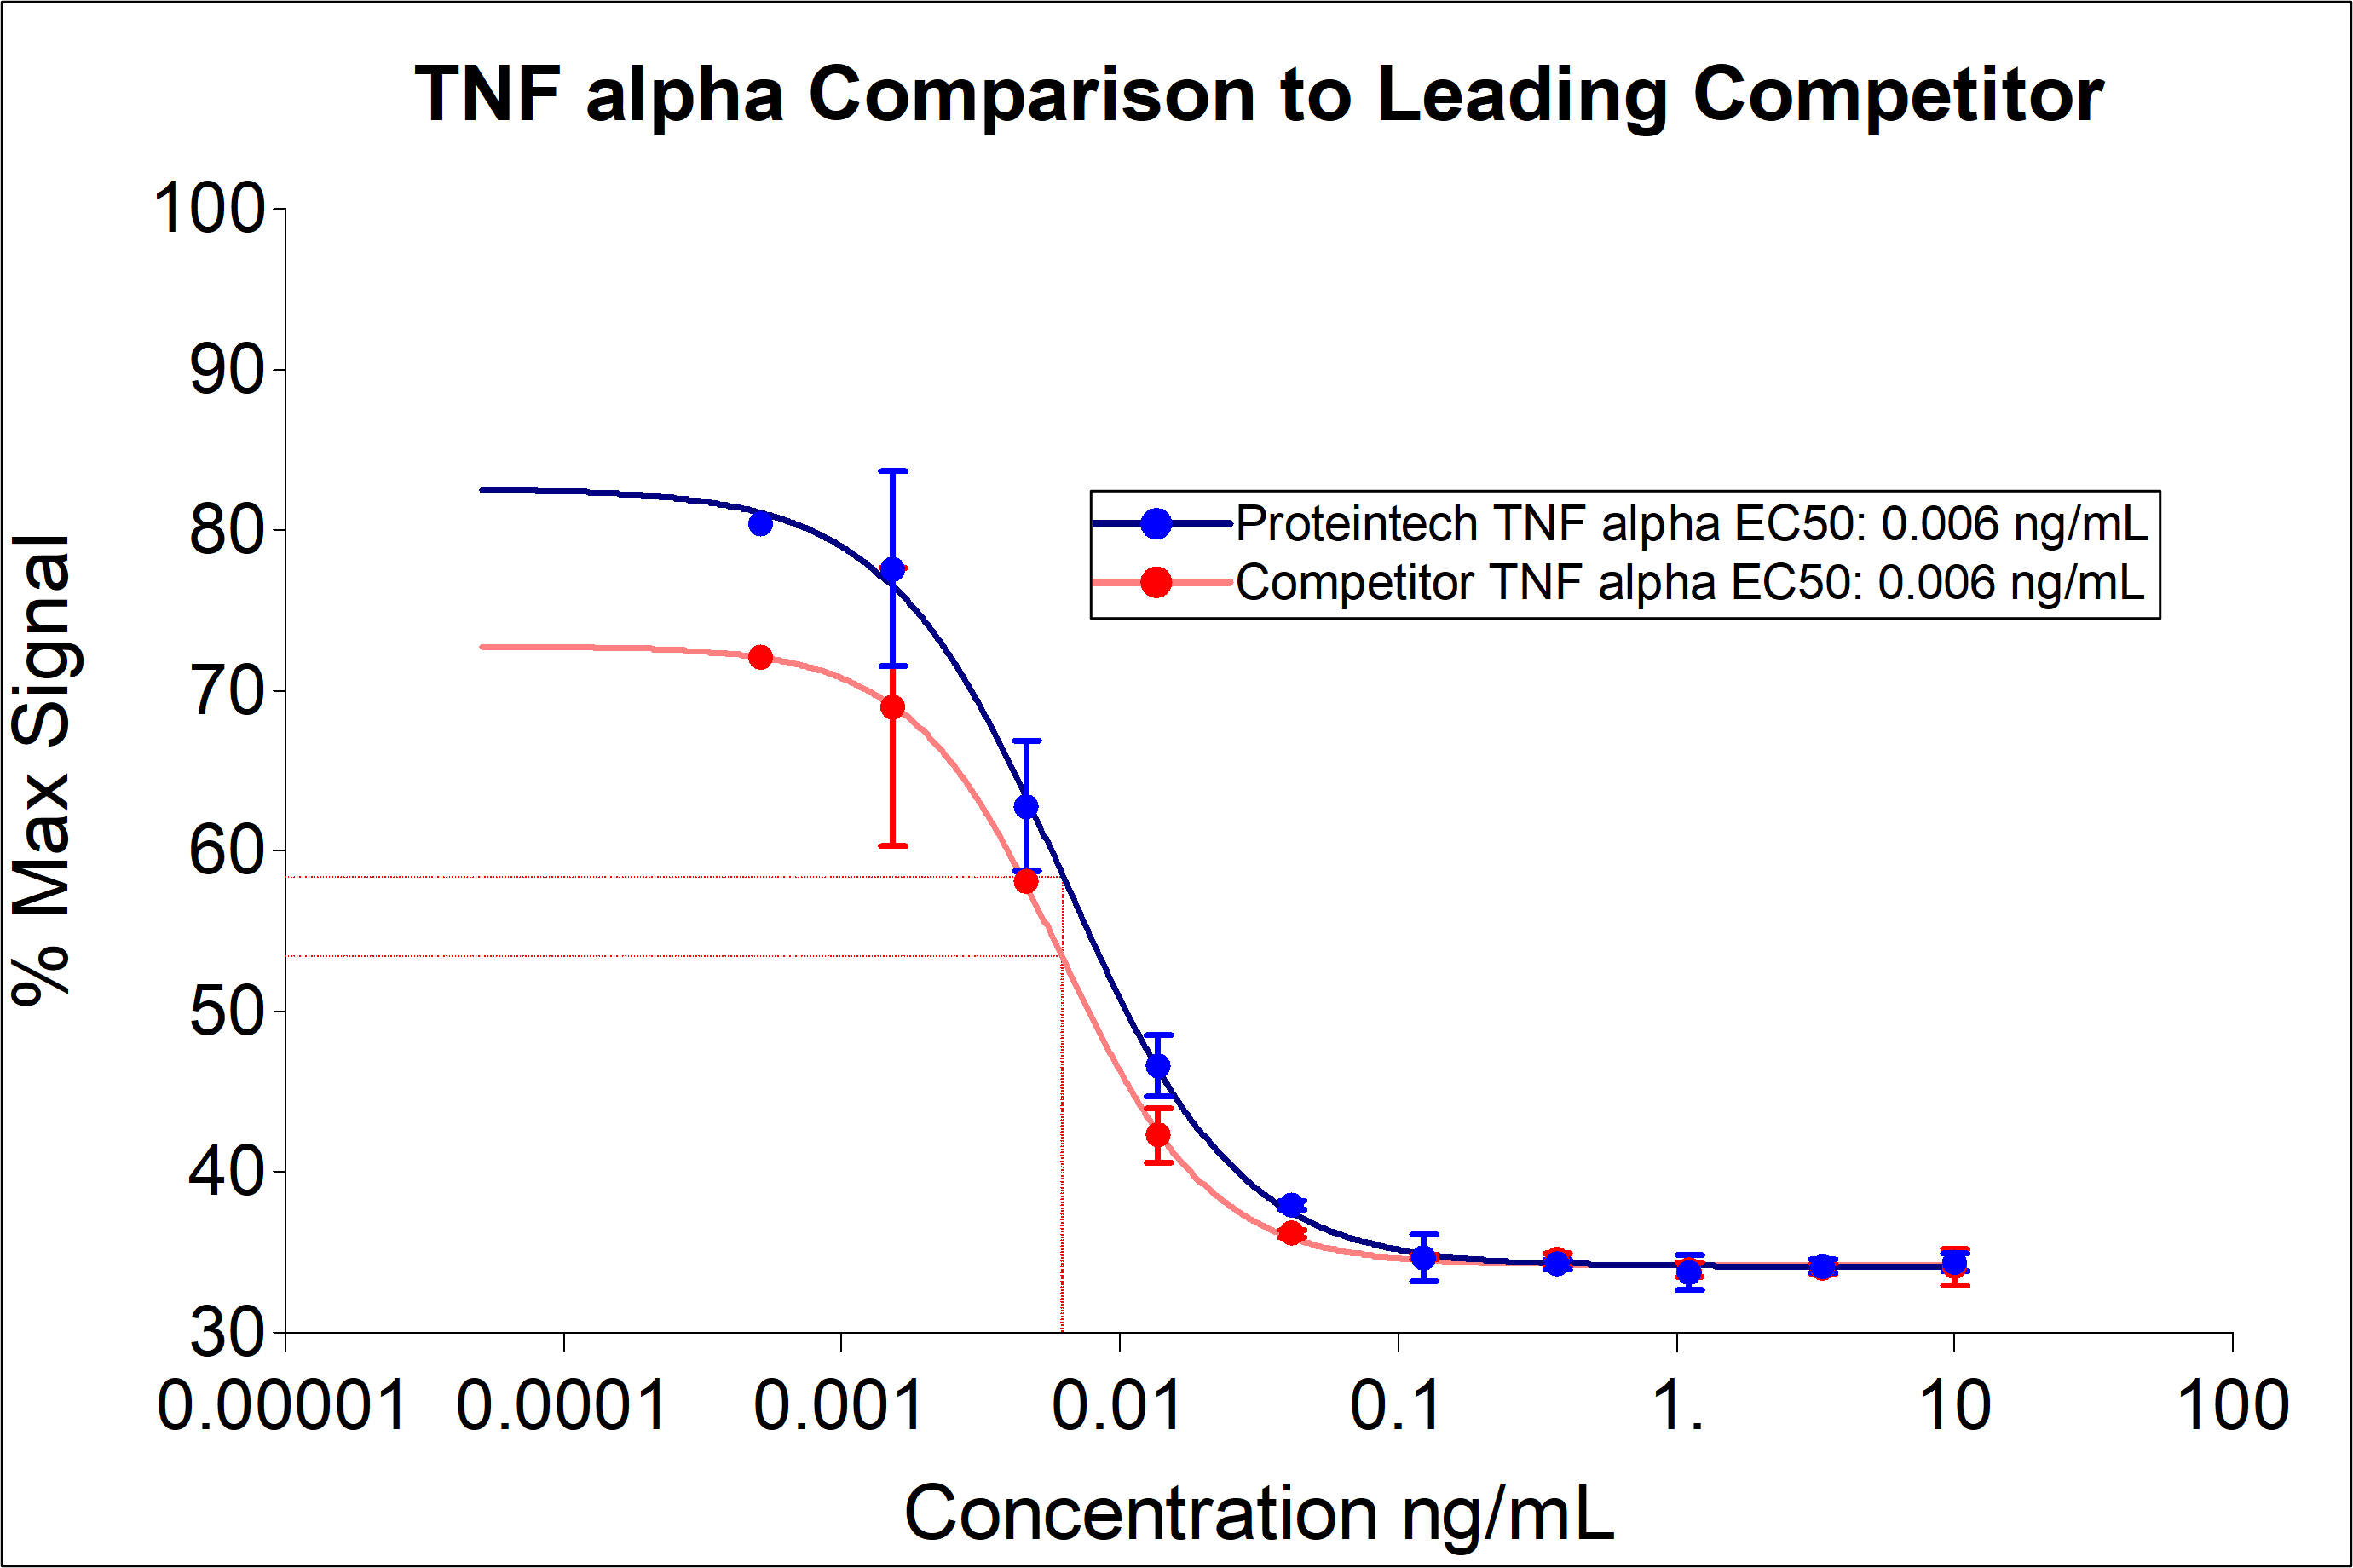 Proteintech TNF alpha (HZ-1014) demonstrates equivalent induction cytotoxicity and EC50 to leading competitors. TNF alpha demonstrates does-dependent cytotoxicity in the L929 mouse adipose cell line. Cell number was quantitatively assessed by PrestoBlue® cell viability reagent. L929 cells were treated with increasing concentrations of GMP recombinant TNF alpha for 72 hours in the presence of actinomycin D. The EC50 was determined using a 4-parameter non-linear regression model. The EC50 range is 0.002-0.026 ng/mL.